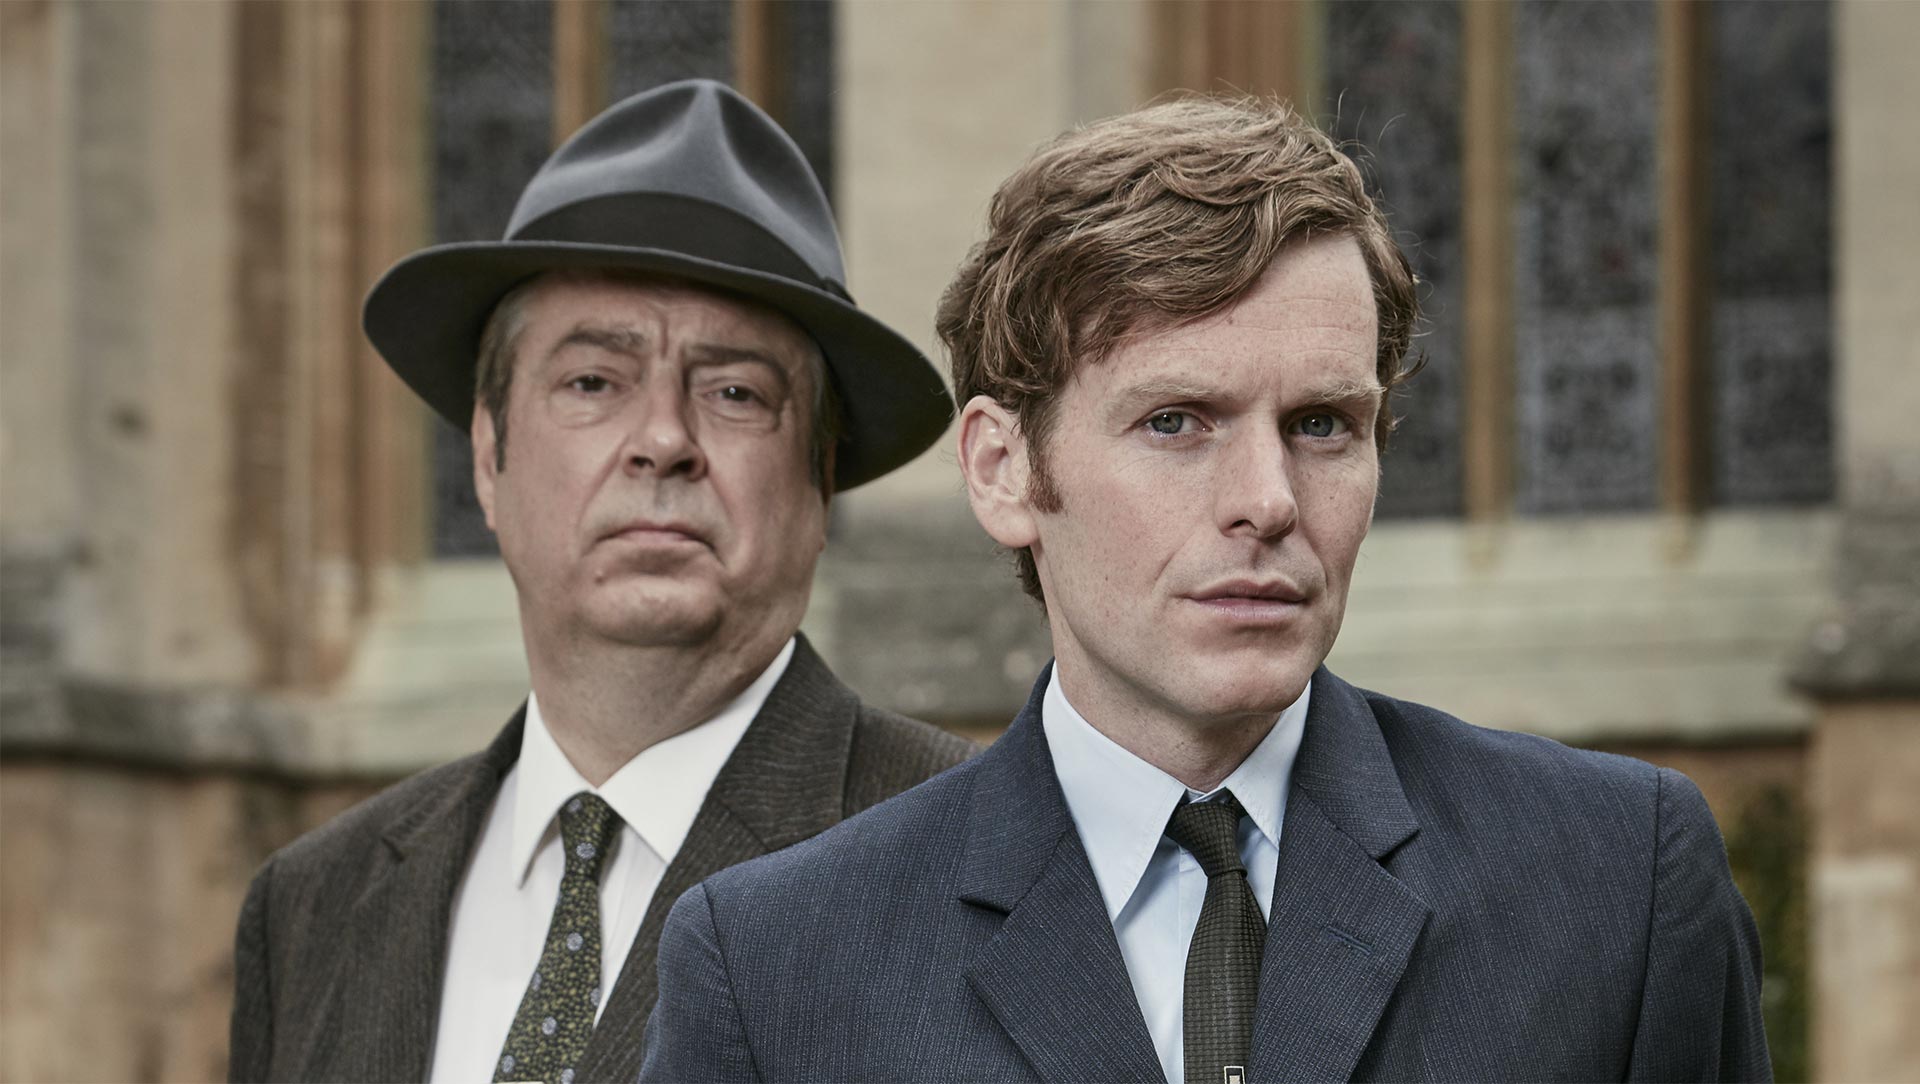 Shown from left to right: Roger Allam as DI Thursday and Shaun Evans as DC Morse